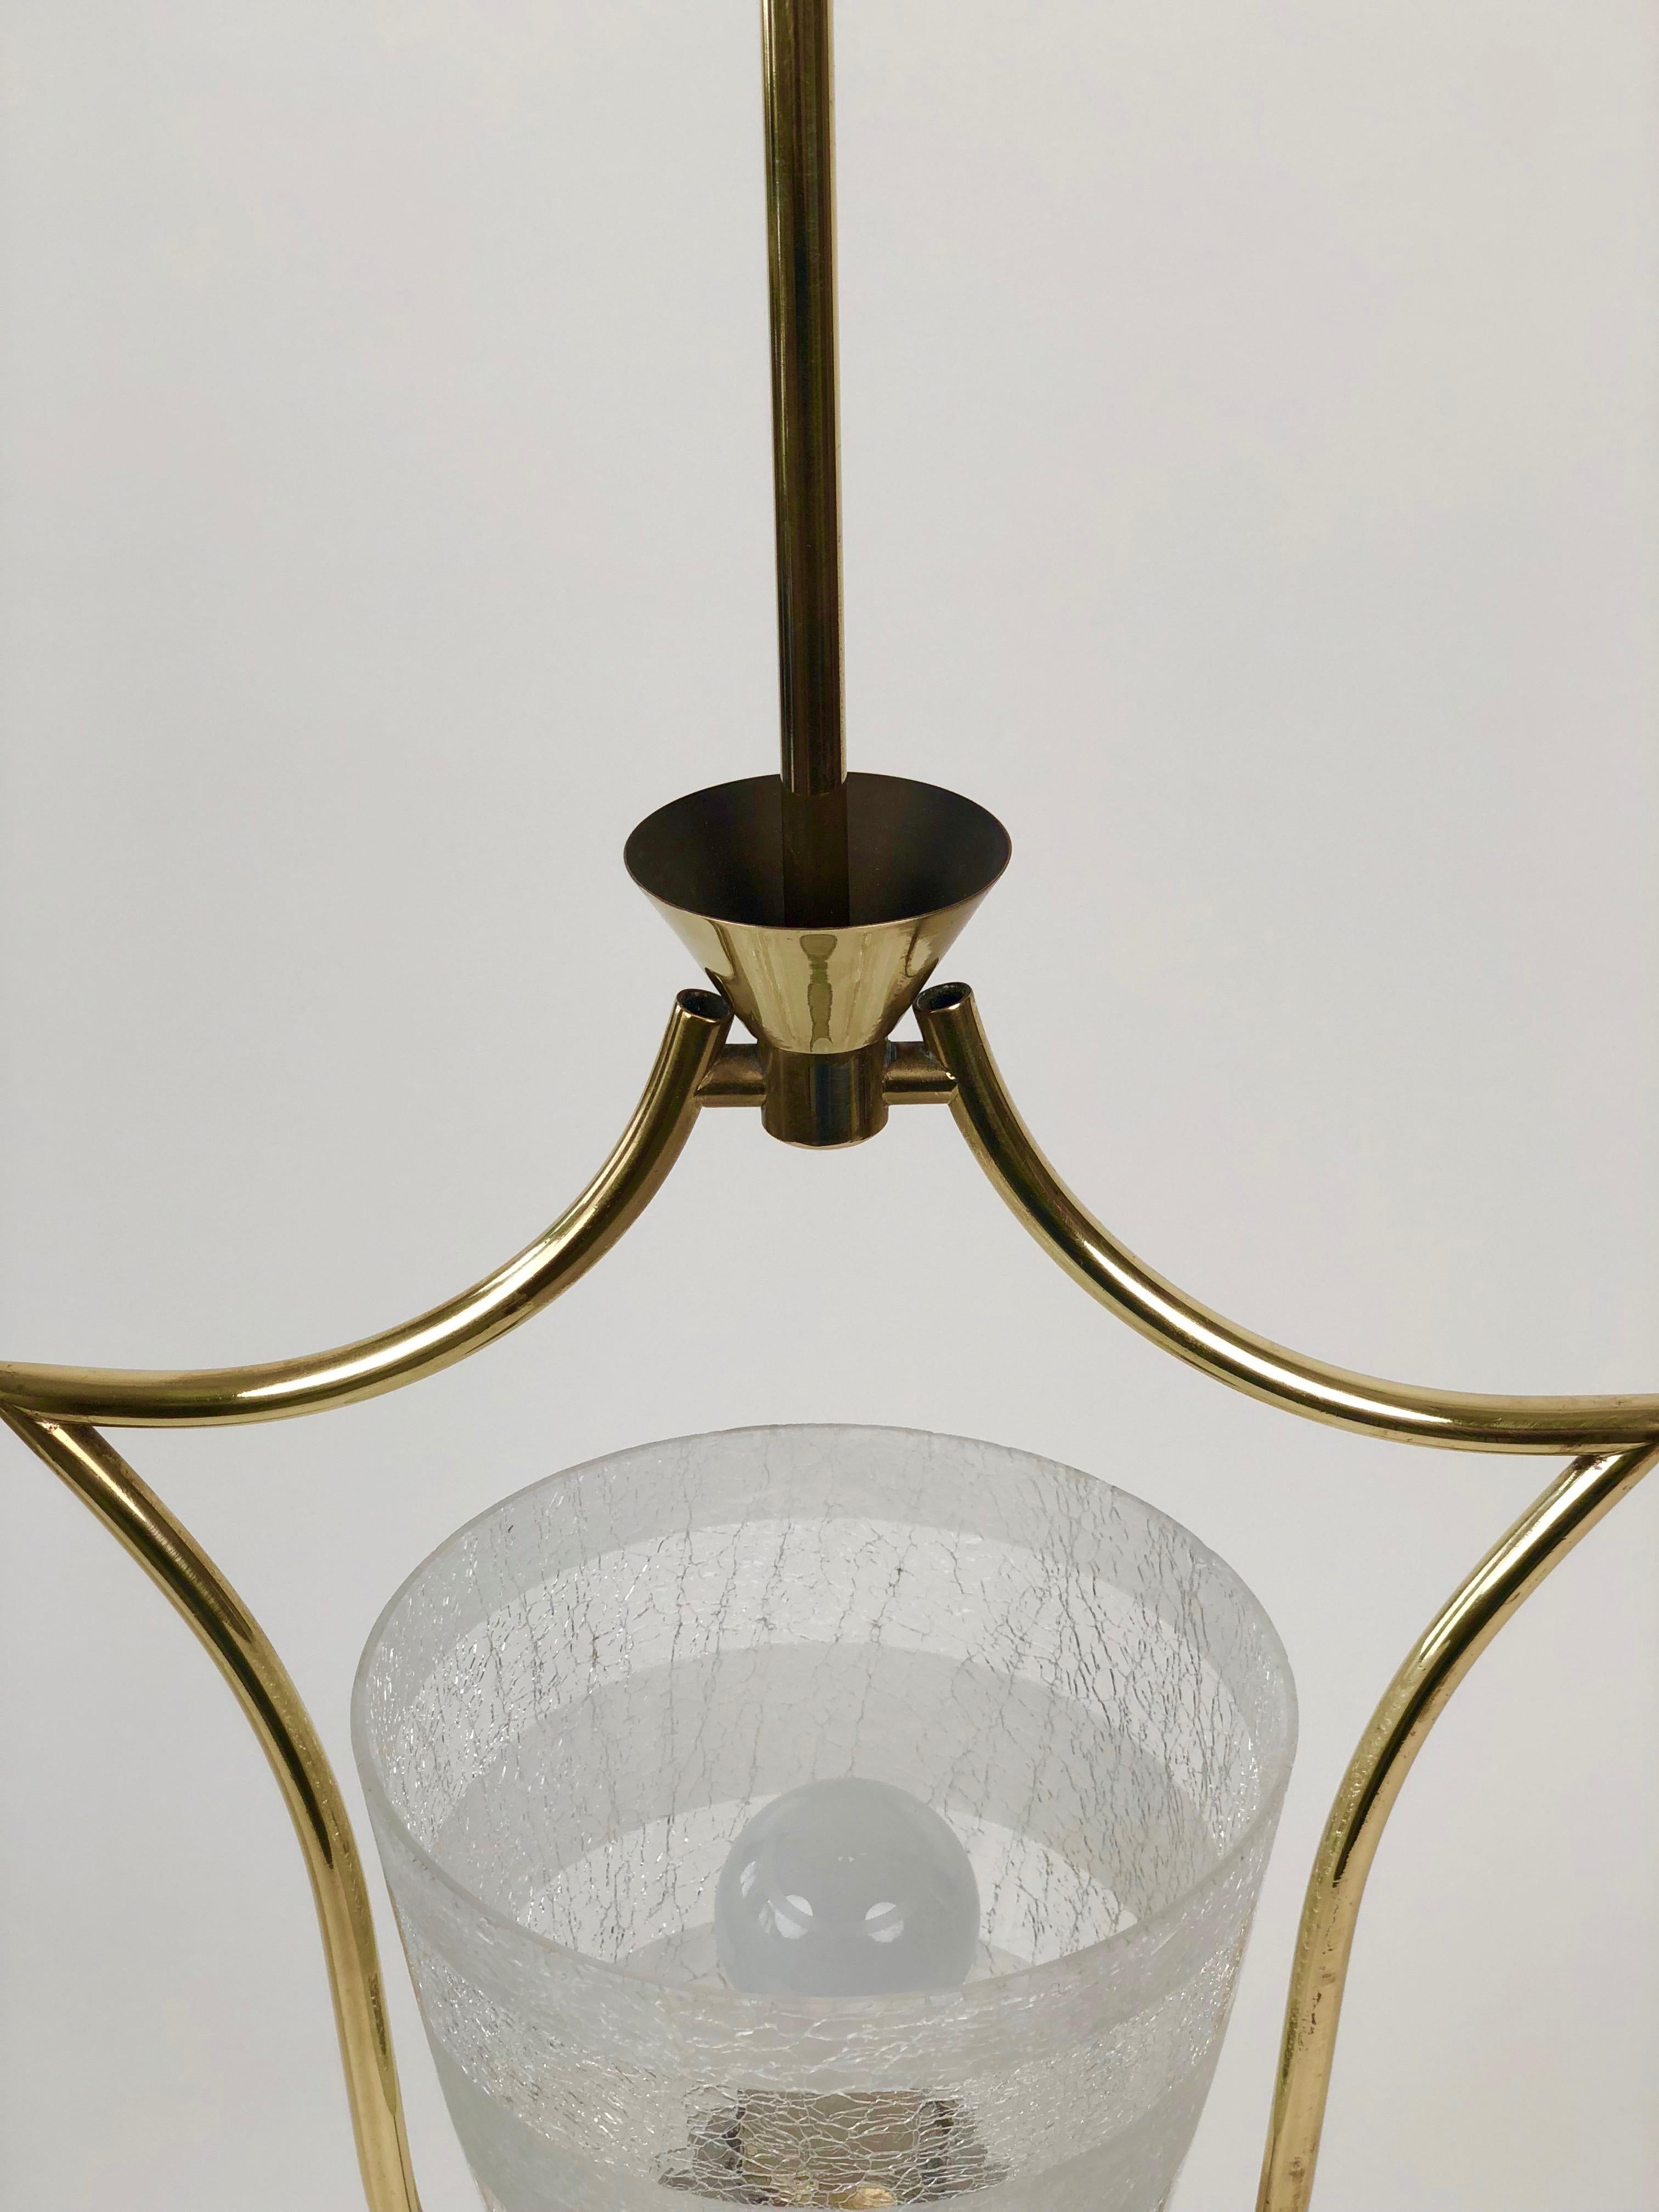 Hollywood Regency Styled Pendant Lamp in Brass and Glass, from Austria, 1950s For Sale 3